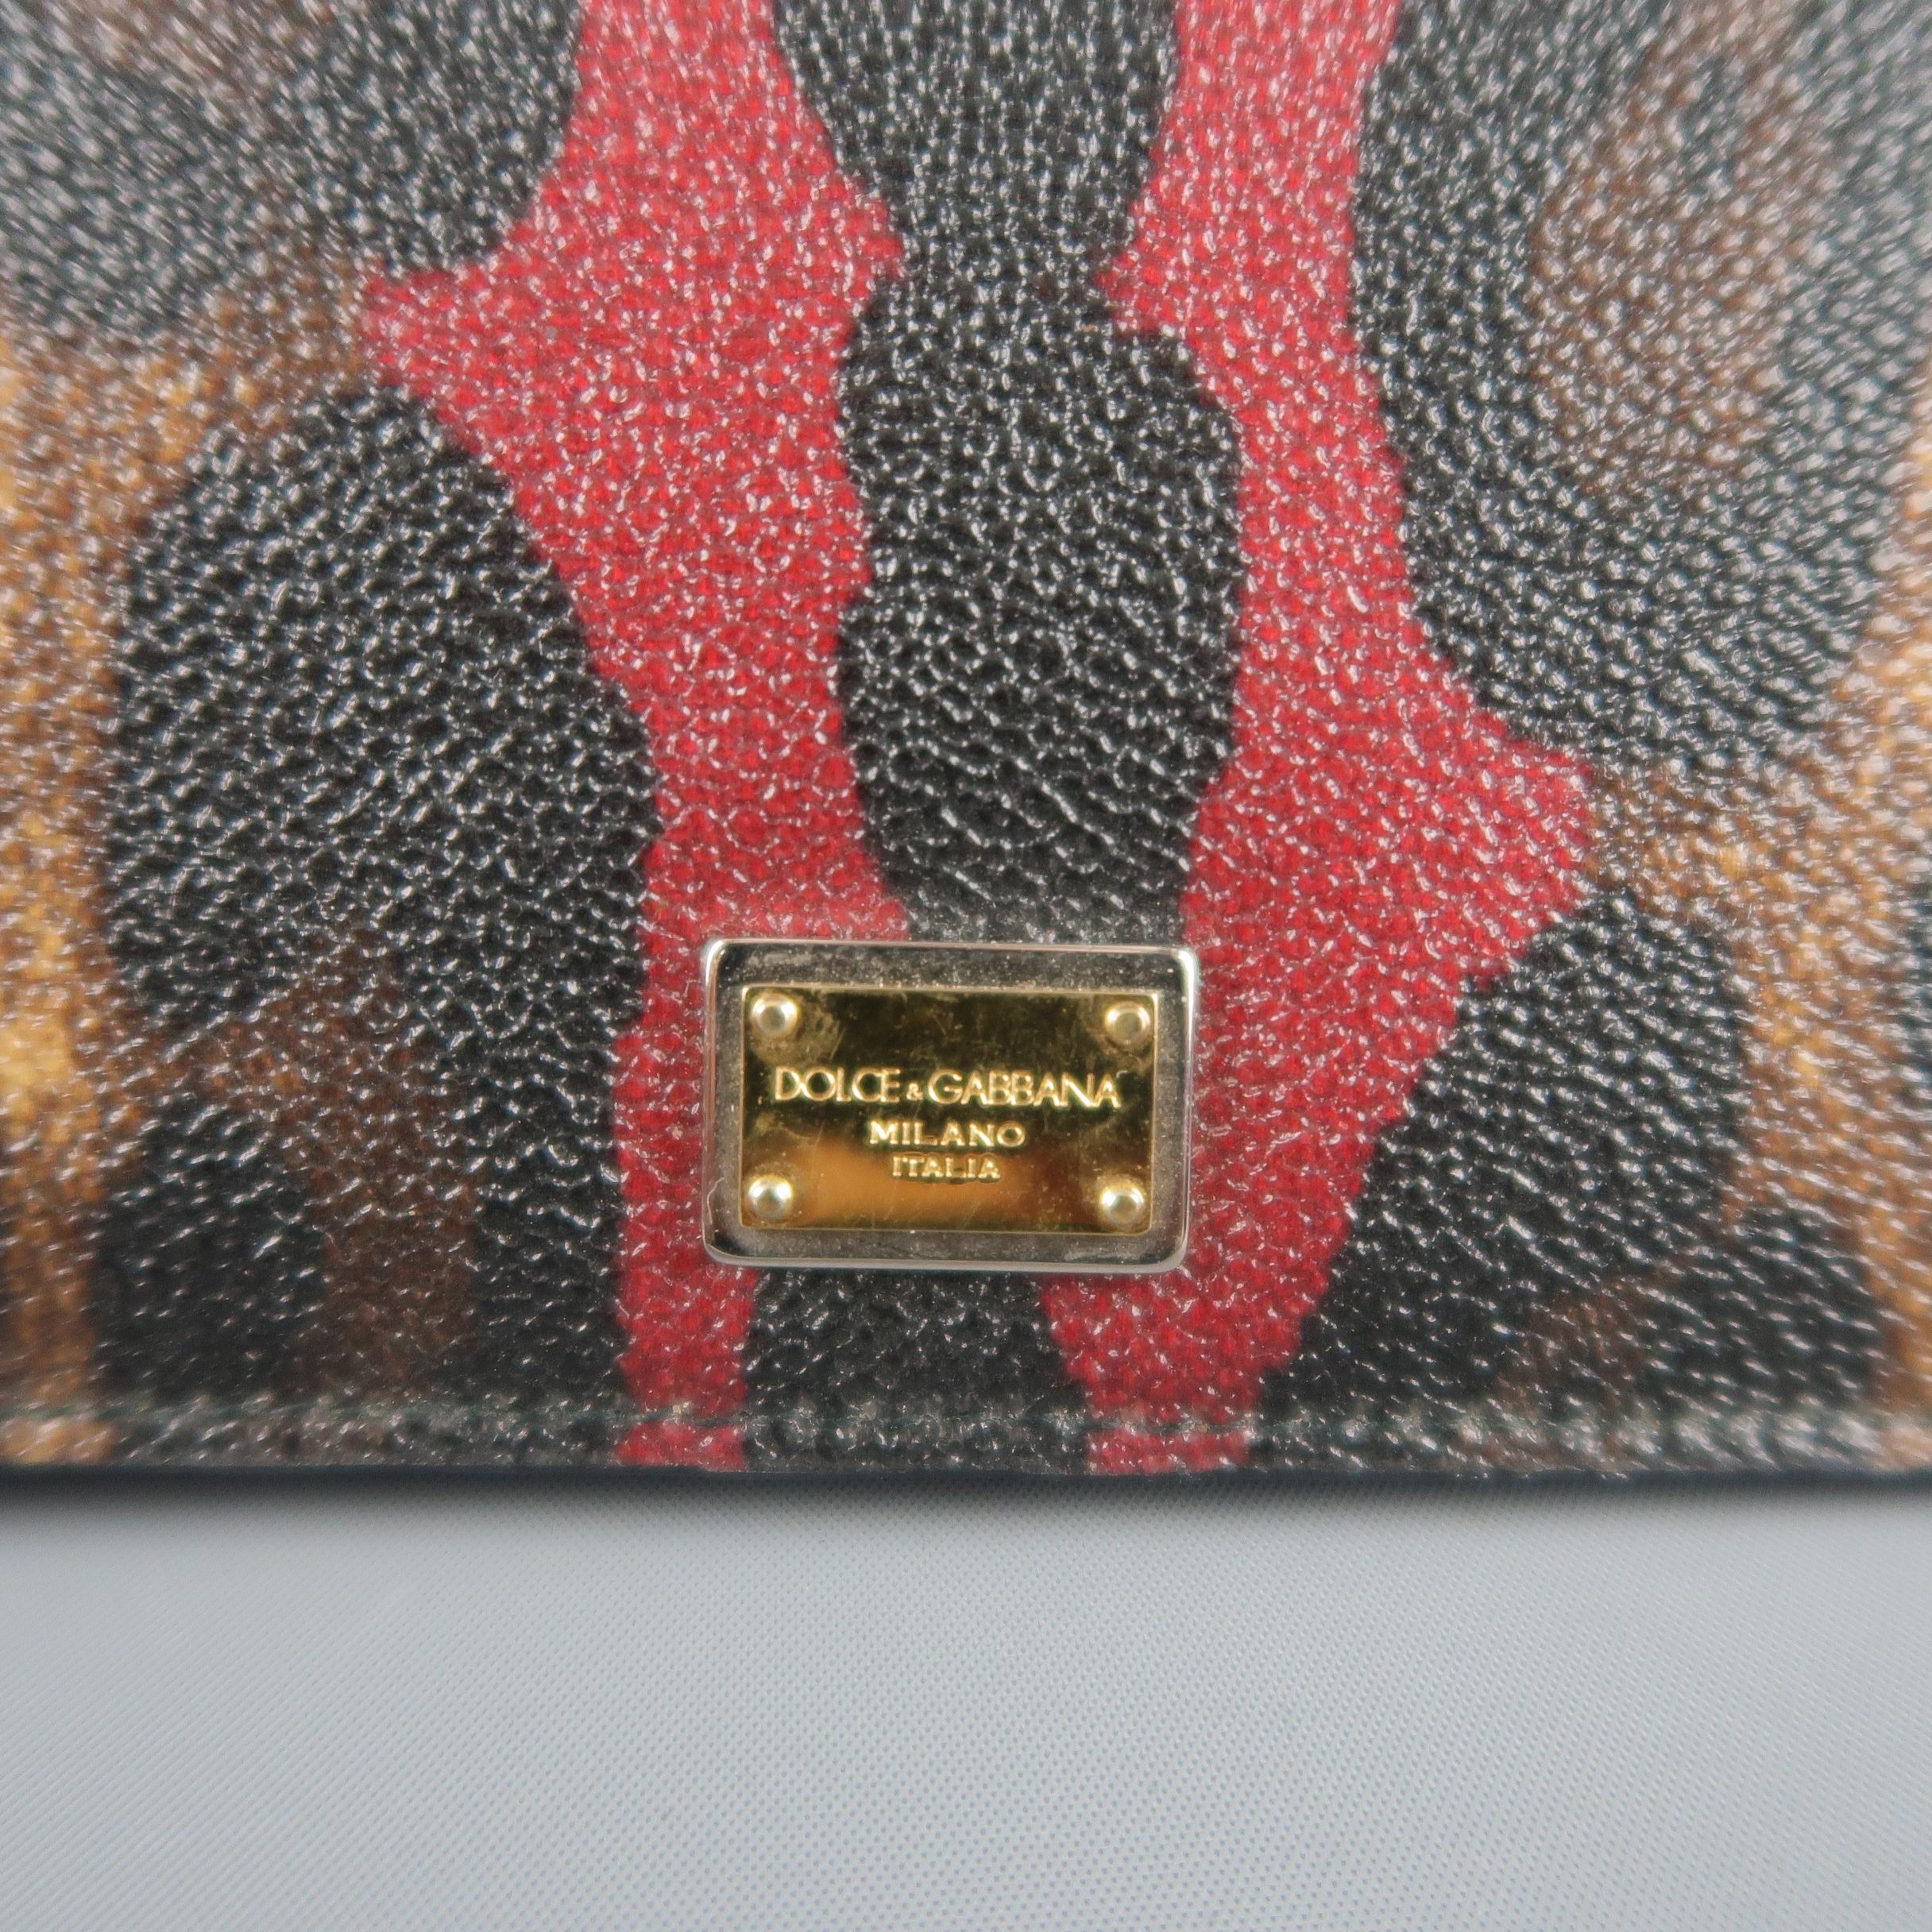 DOLCE & GABBANA tablet case comes in brown and burgundy leopard print textured coated canvas with a snap closure and black leather interior with card holders. Minor wear on interior. Made in Italy.
 
Good Pre-Owned Condition.
 
8 X 10 in.